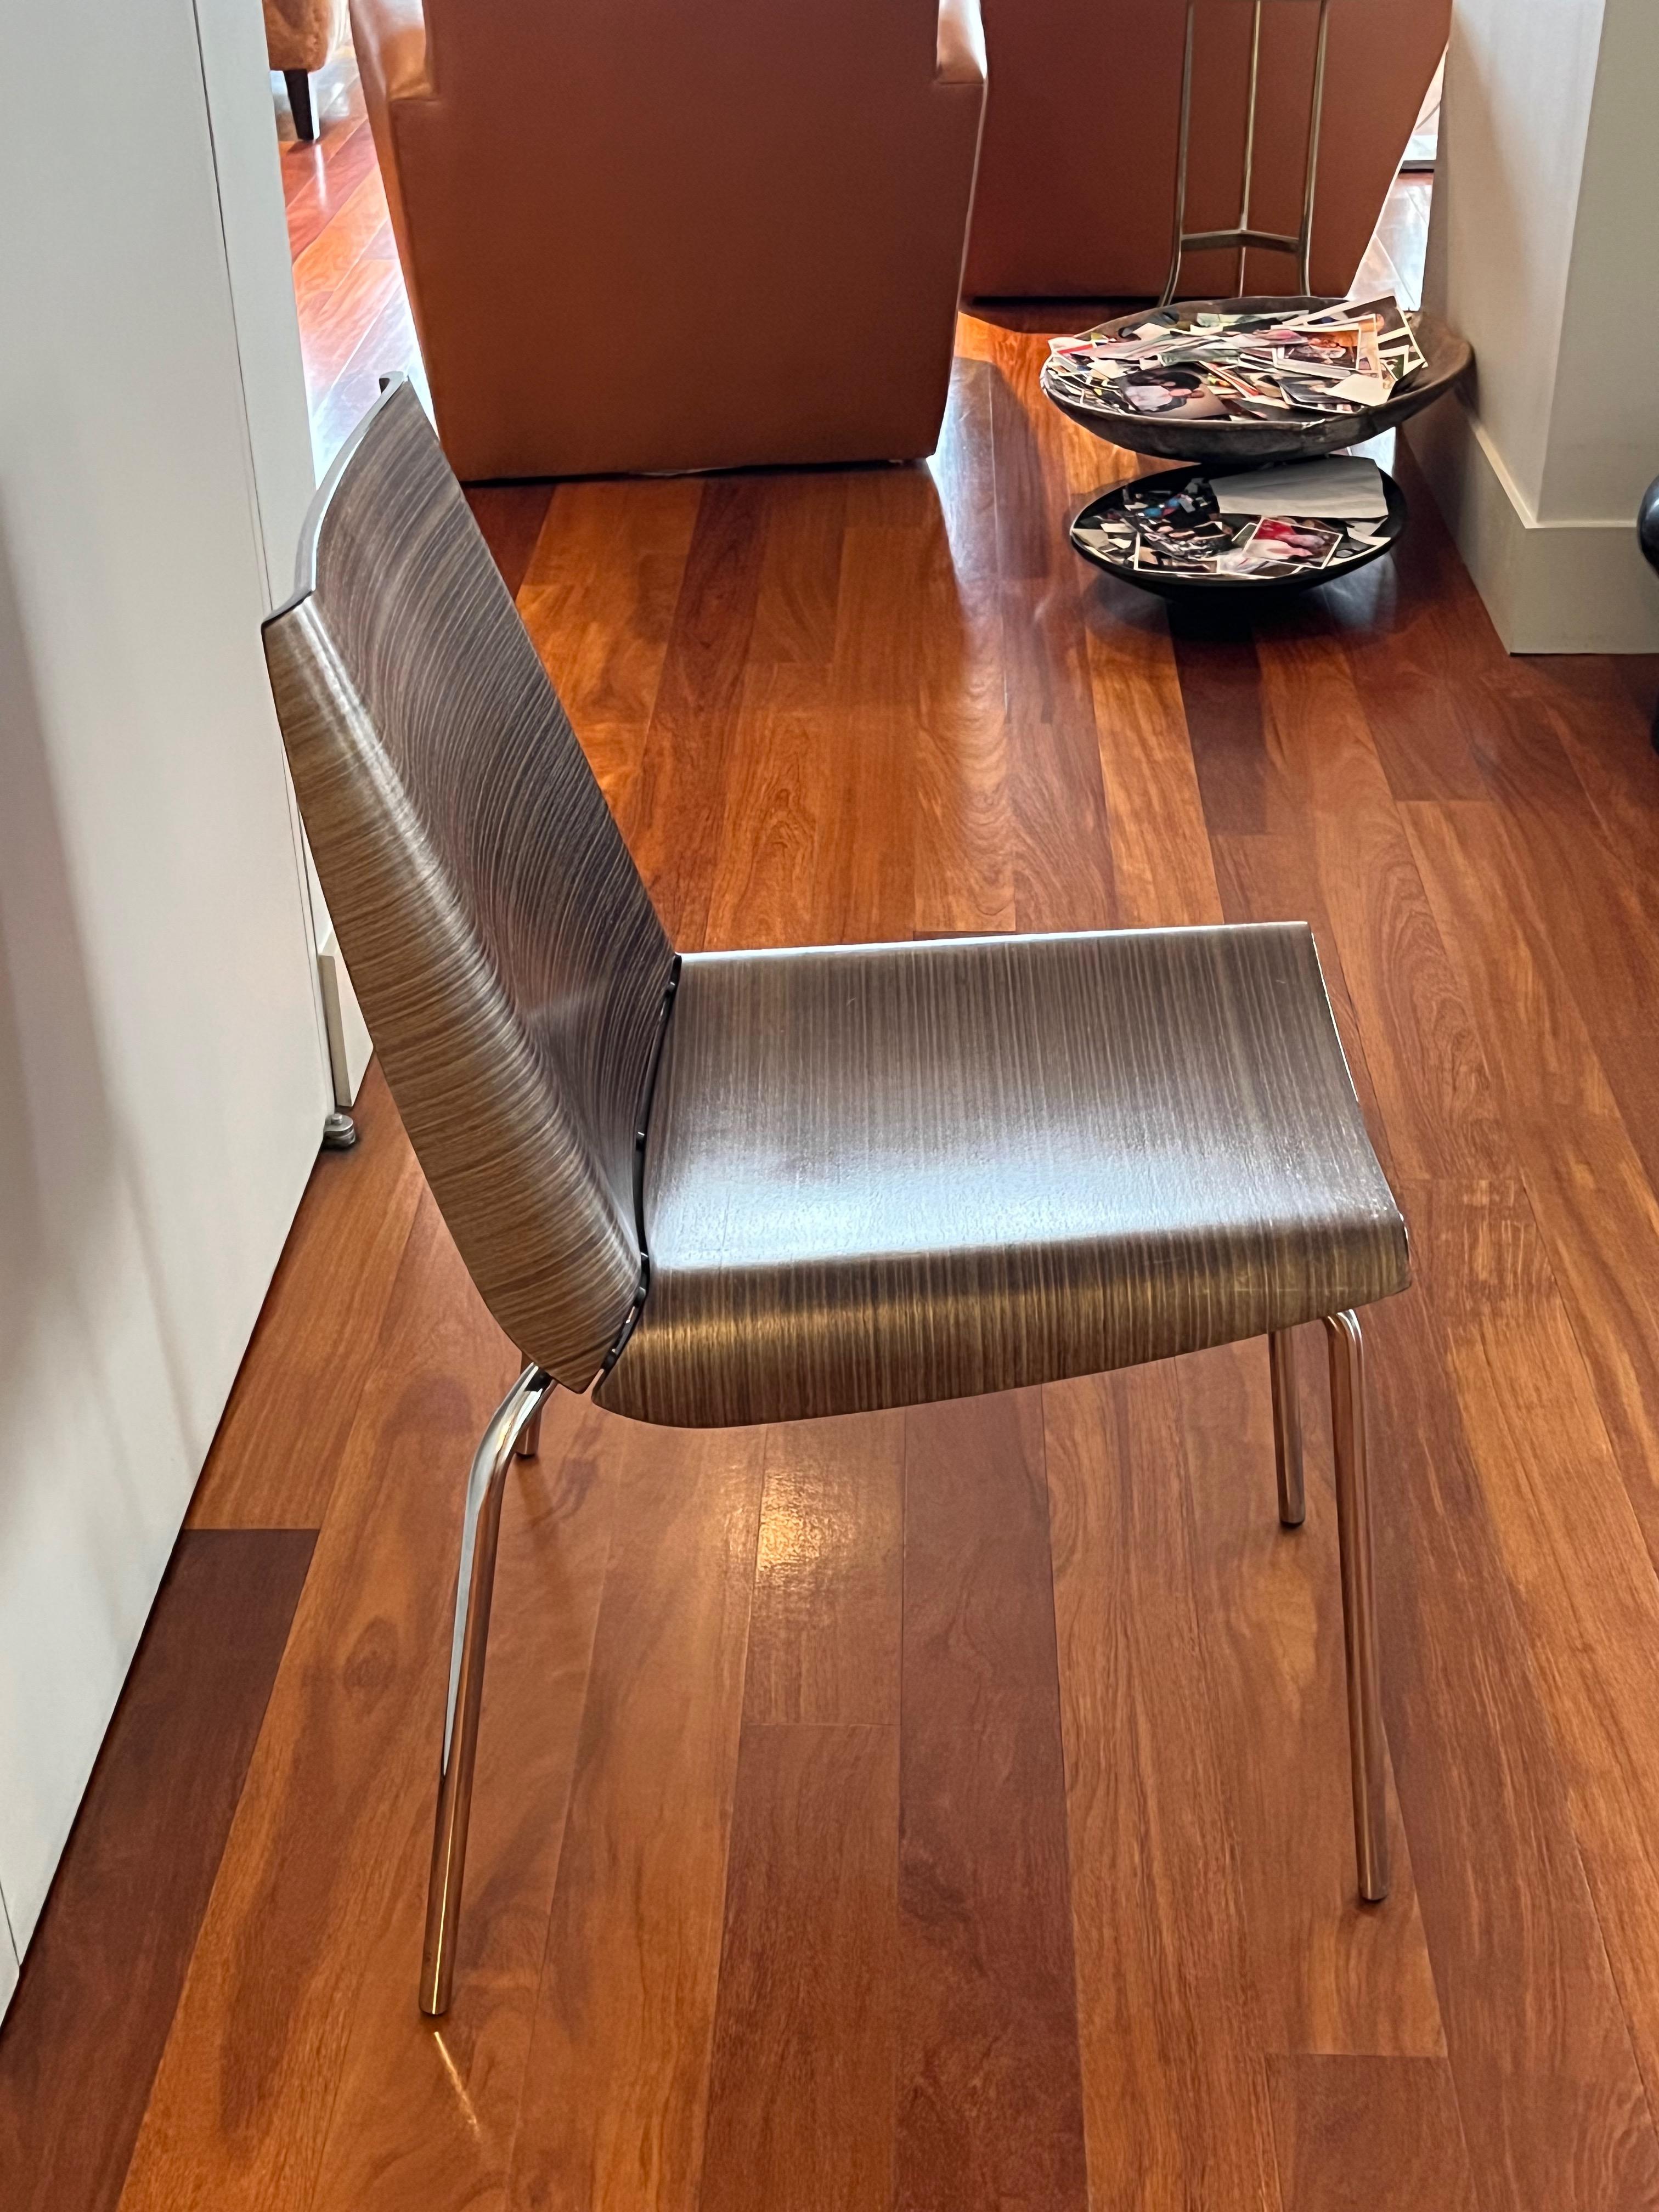 Chrome Set of six  Millefoglie Chairs by Biagio Cisotti and Sandra Laube for Plank 